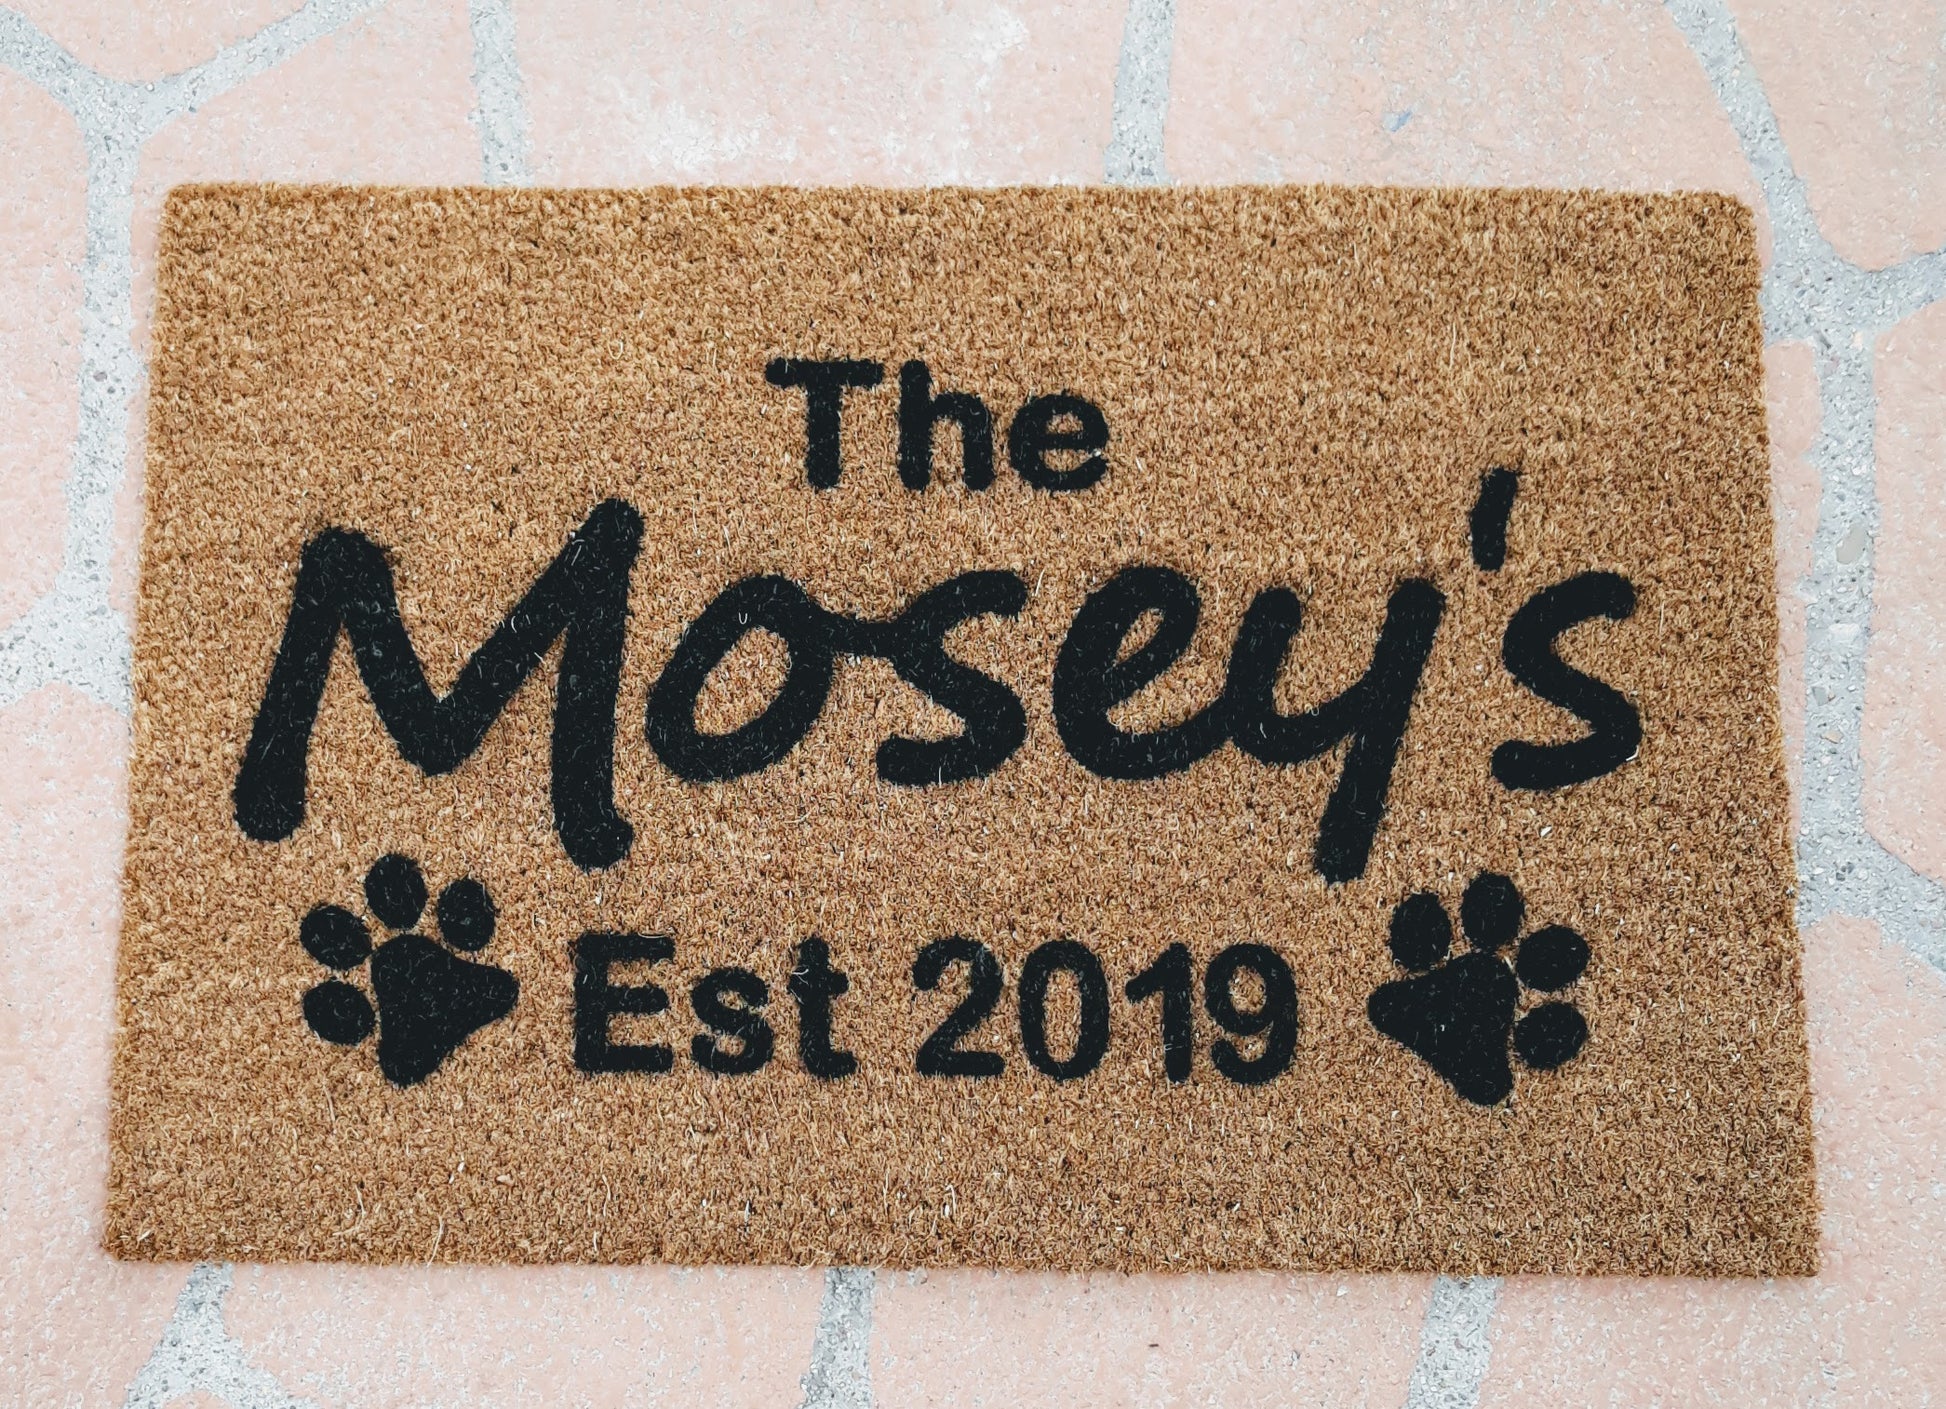 The family name Personalised Doormat with paw prints - Personalised Doormat Australia